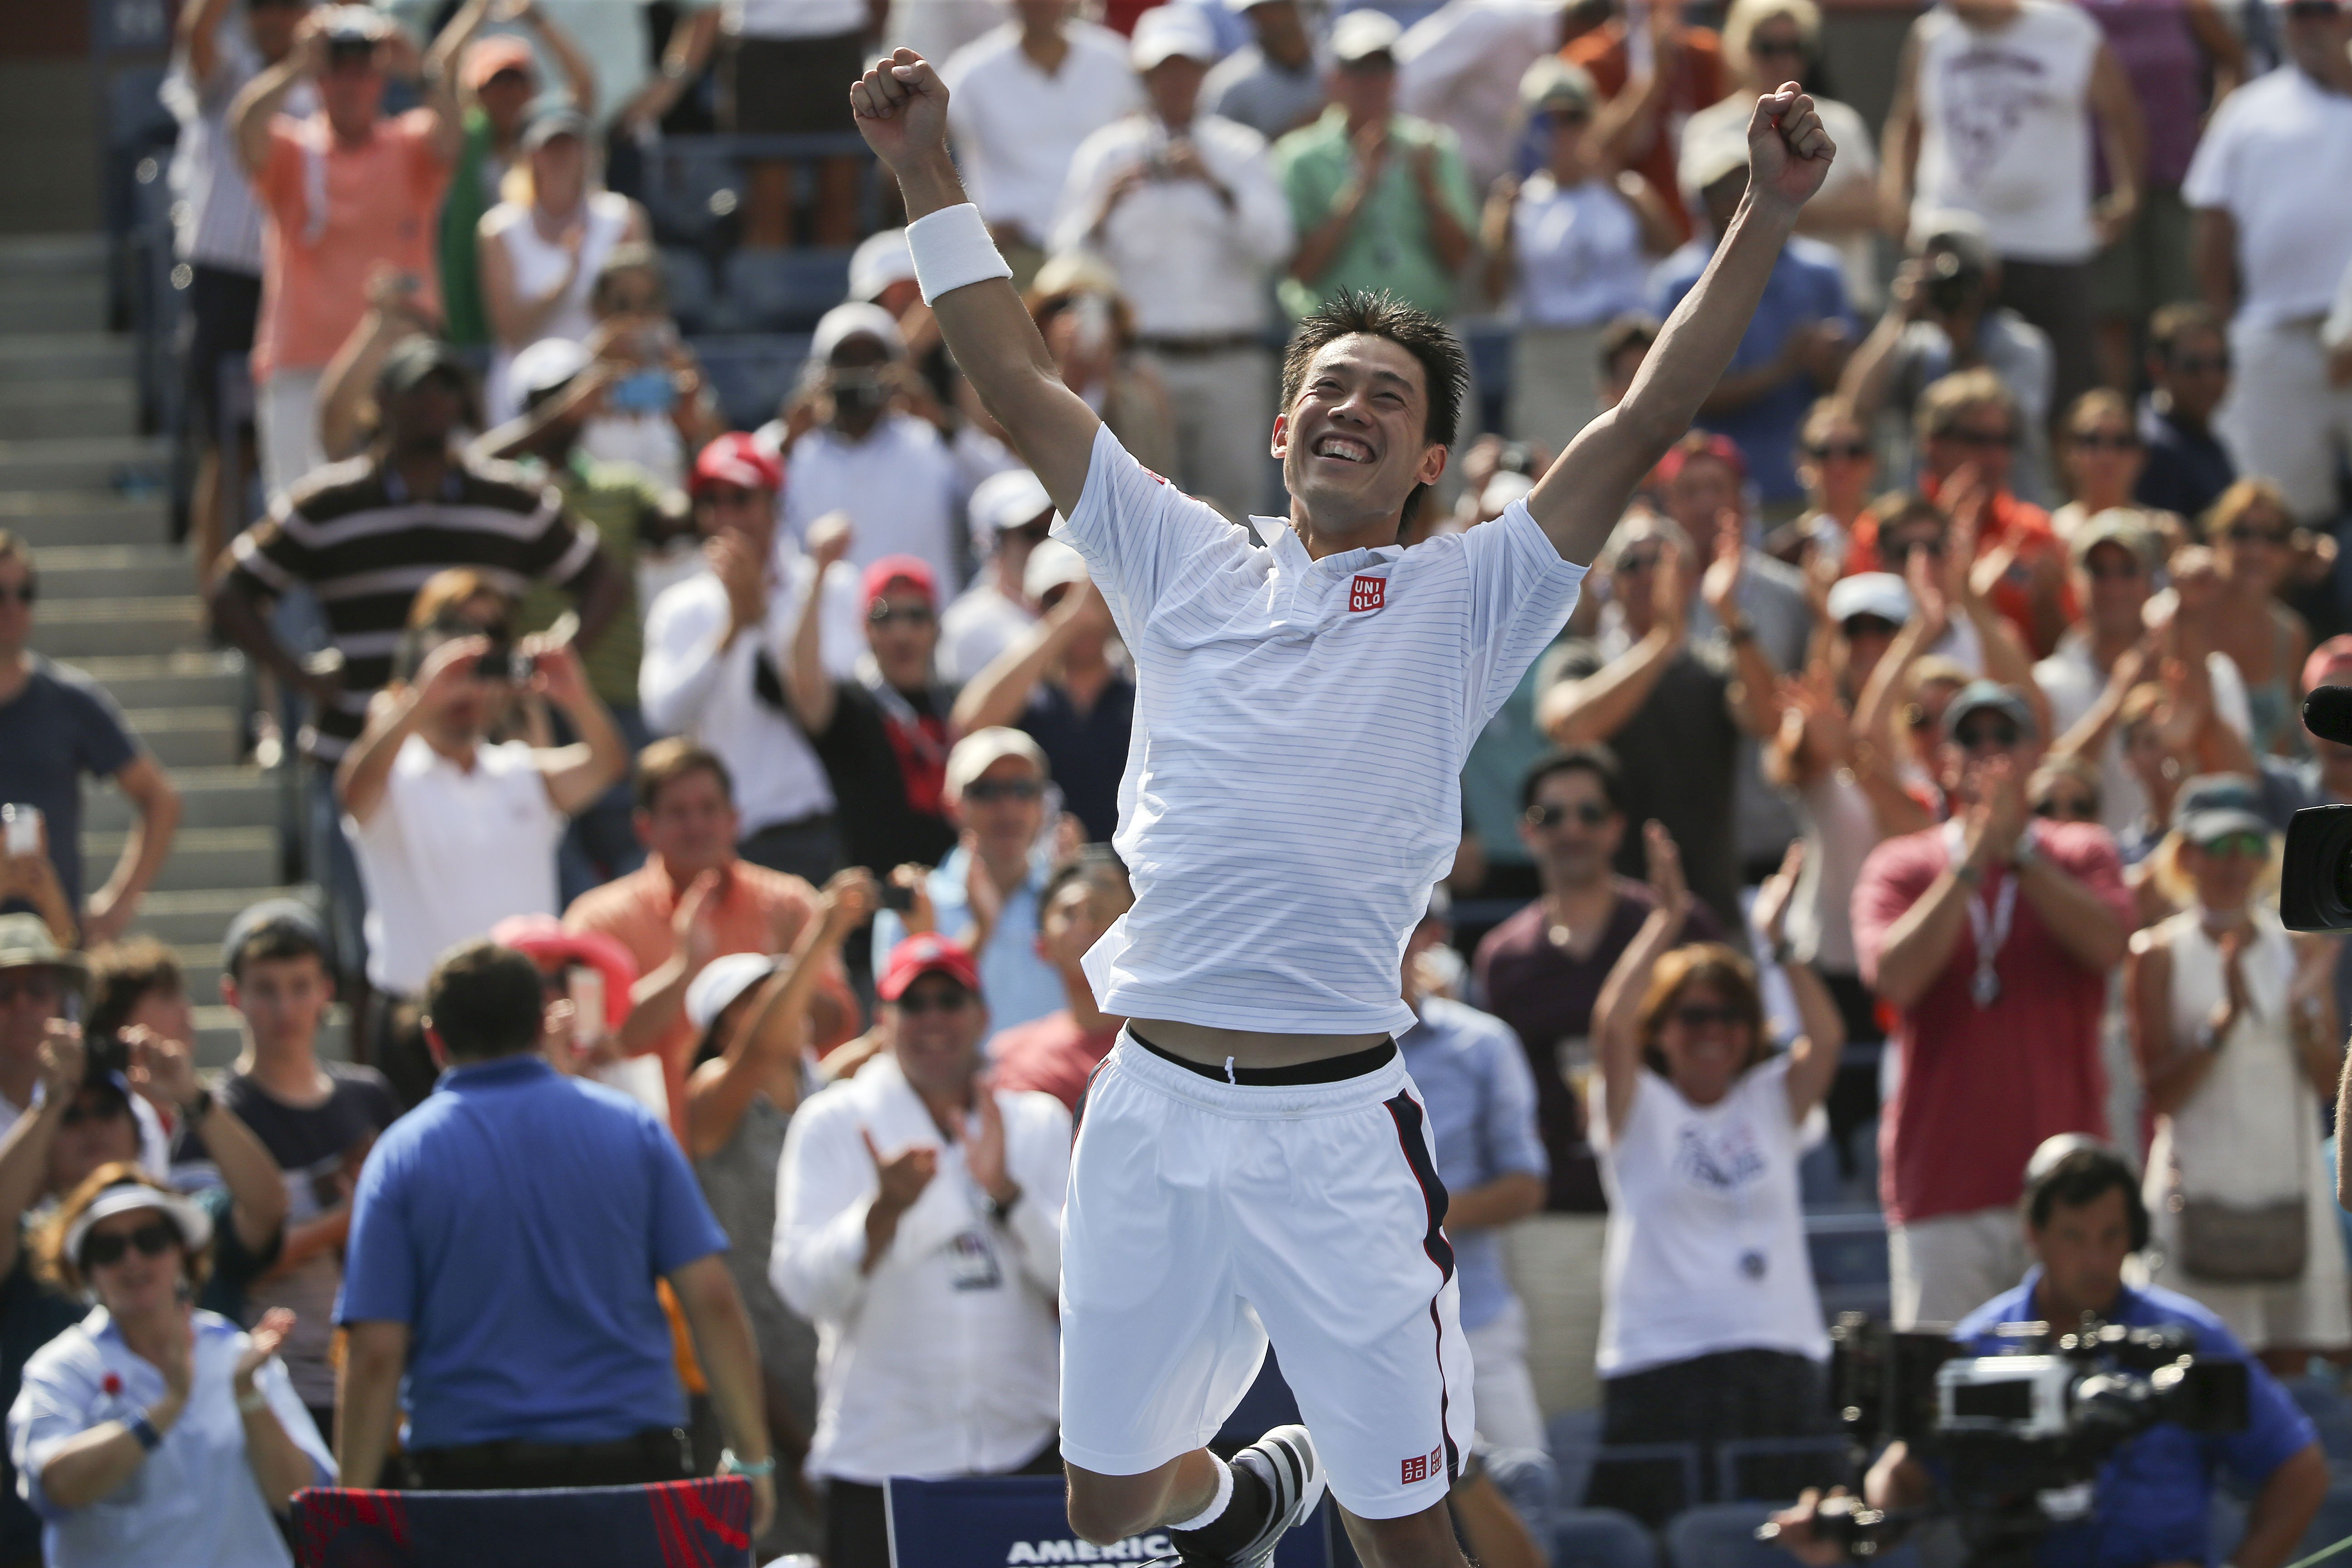 Kei Nishikori, of Japan, reacts after defeating Novak Djokovic, of Serbia, during the semifinals of the 2014 U.S. Open tennis tournament in New York City on Sept. 6, 2014.